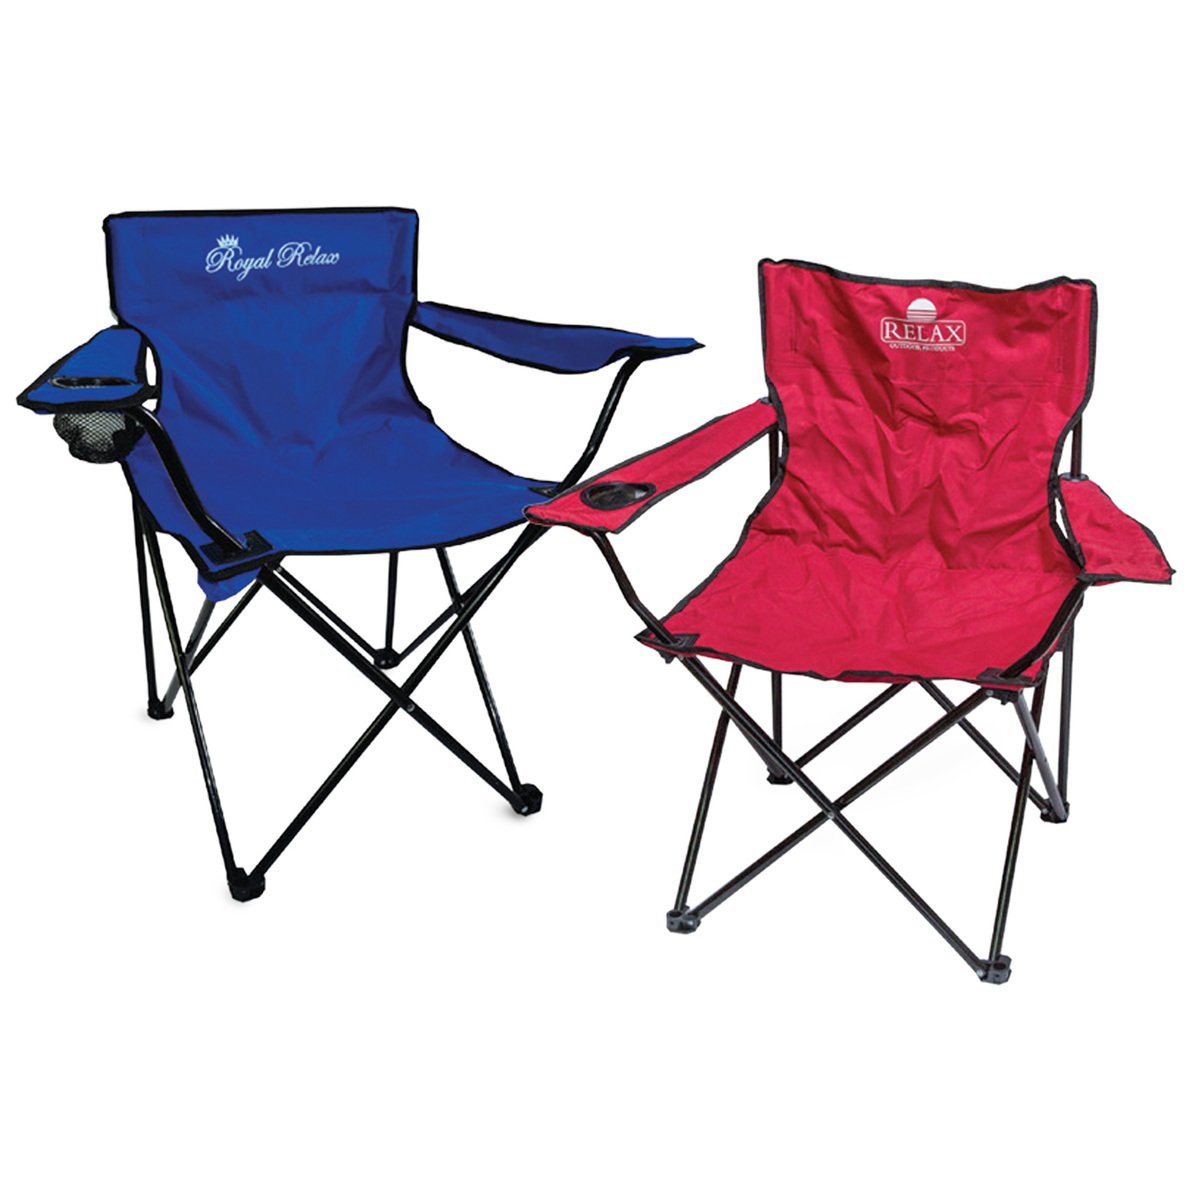 Buy Relax Camping Chair 1pc Assorted Colors HX055 Online at Best Price | Folding Chairs&Table | Lulu KSA in Kuwait